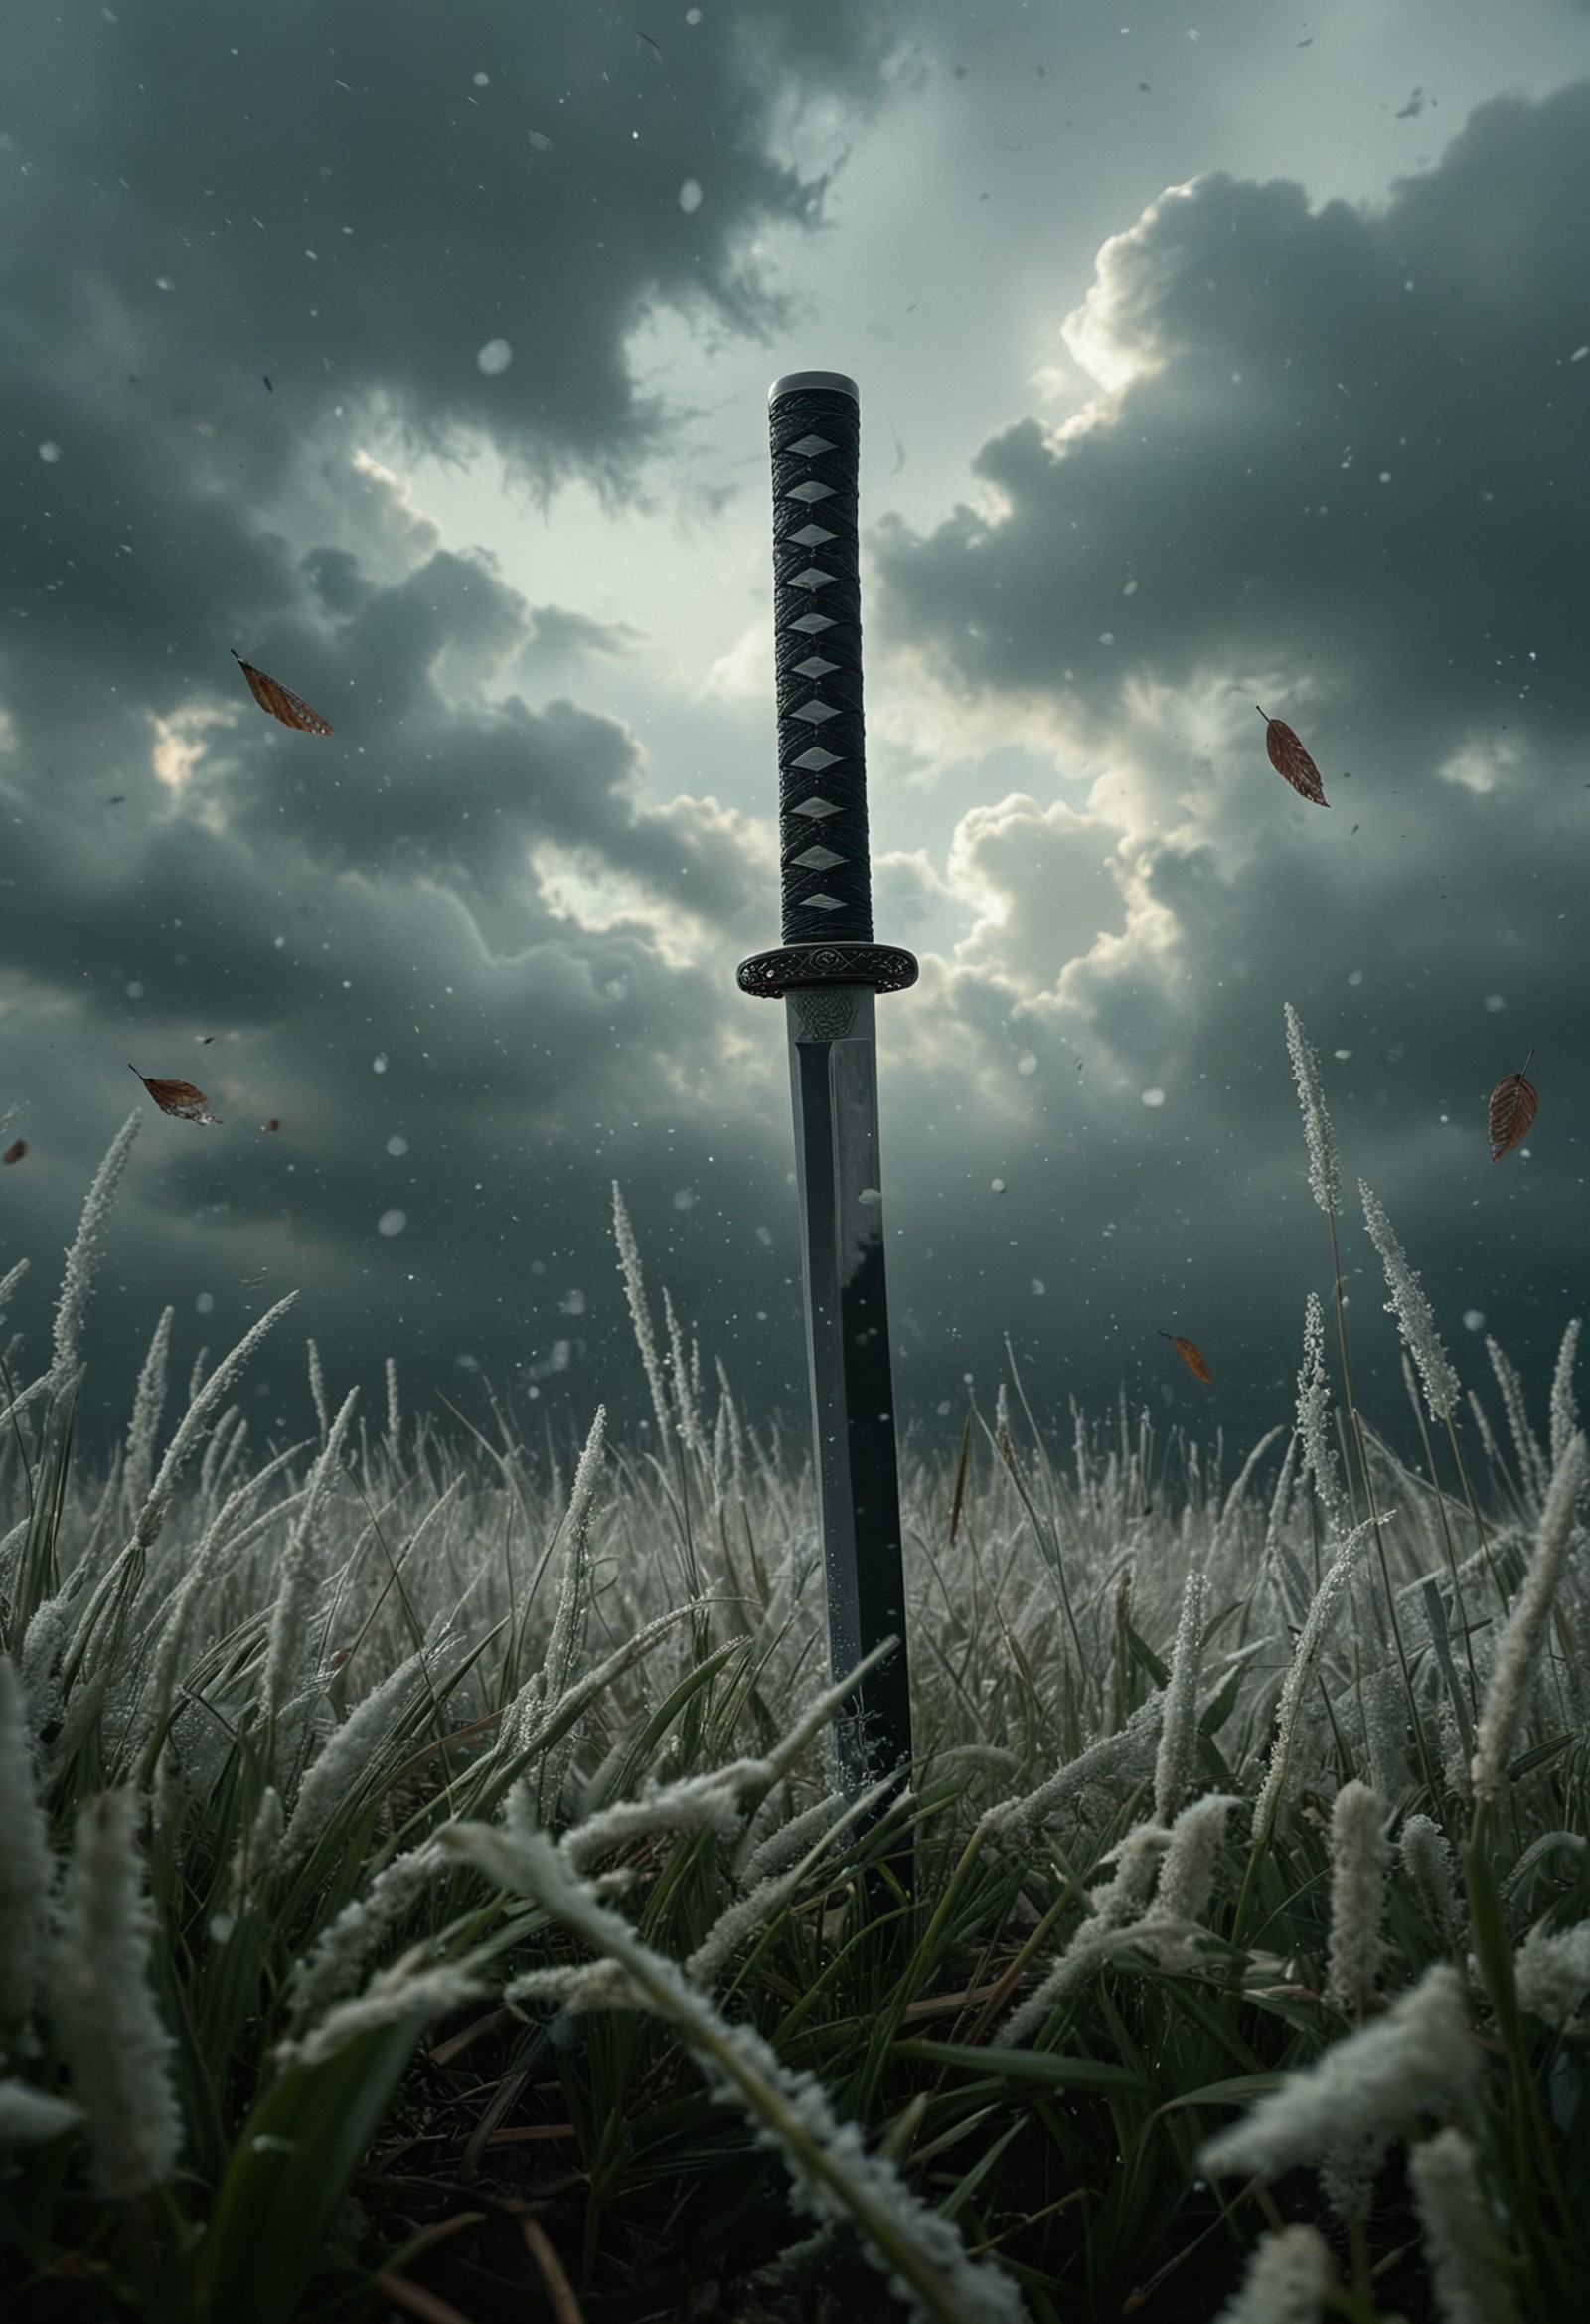 A sword with a black hilt standing upright in a field of white feathery plants. The sky above is stormy, filled with dark clouds and falling leaves, creating a dramatic and moody atmosphere. 